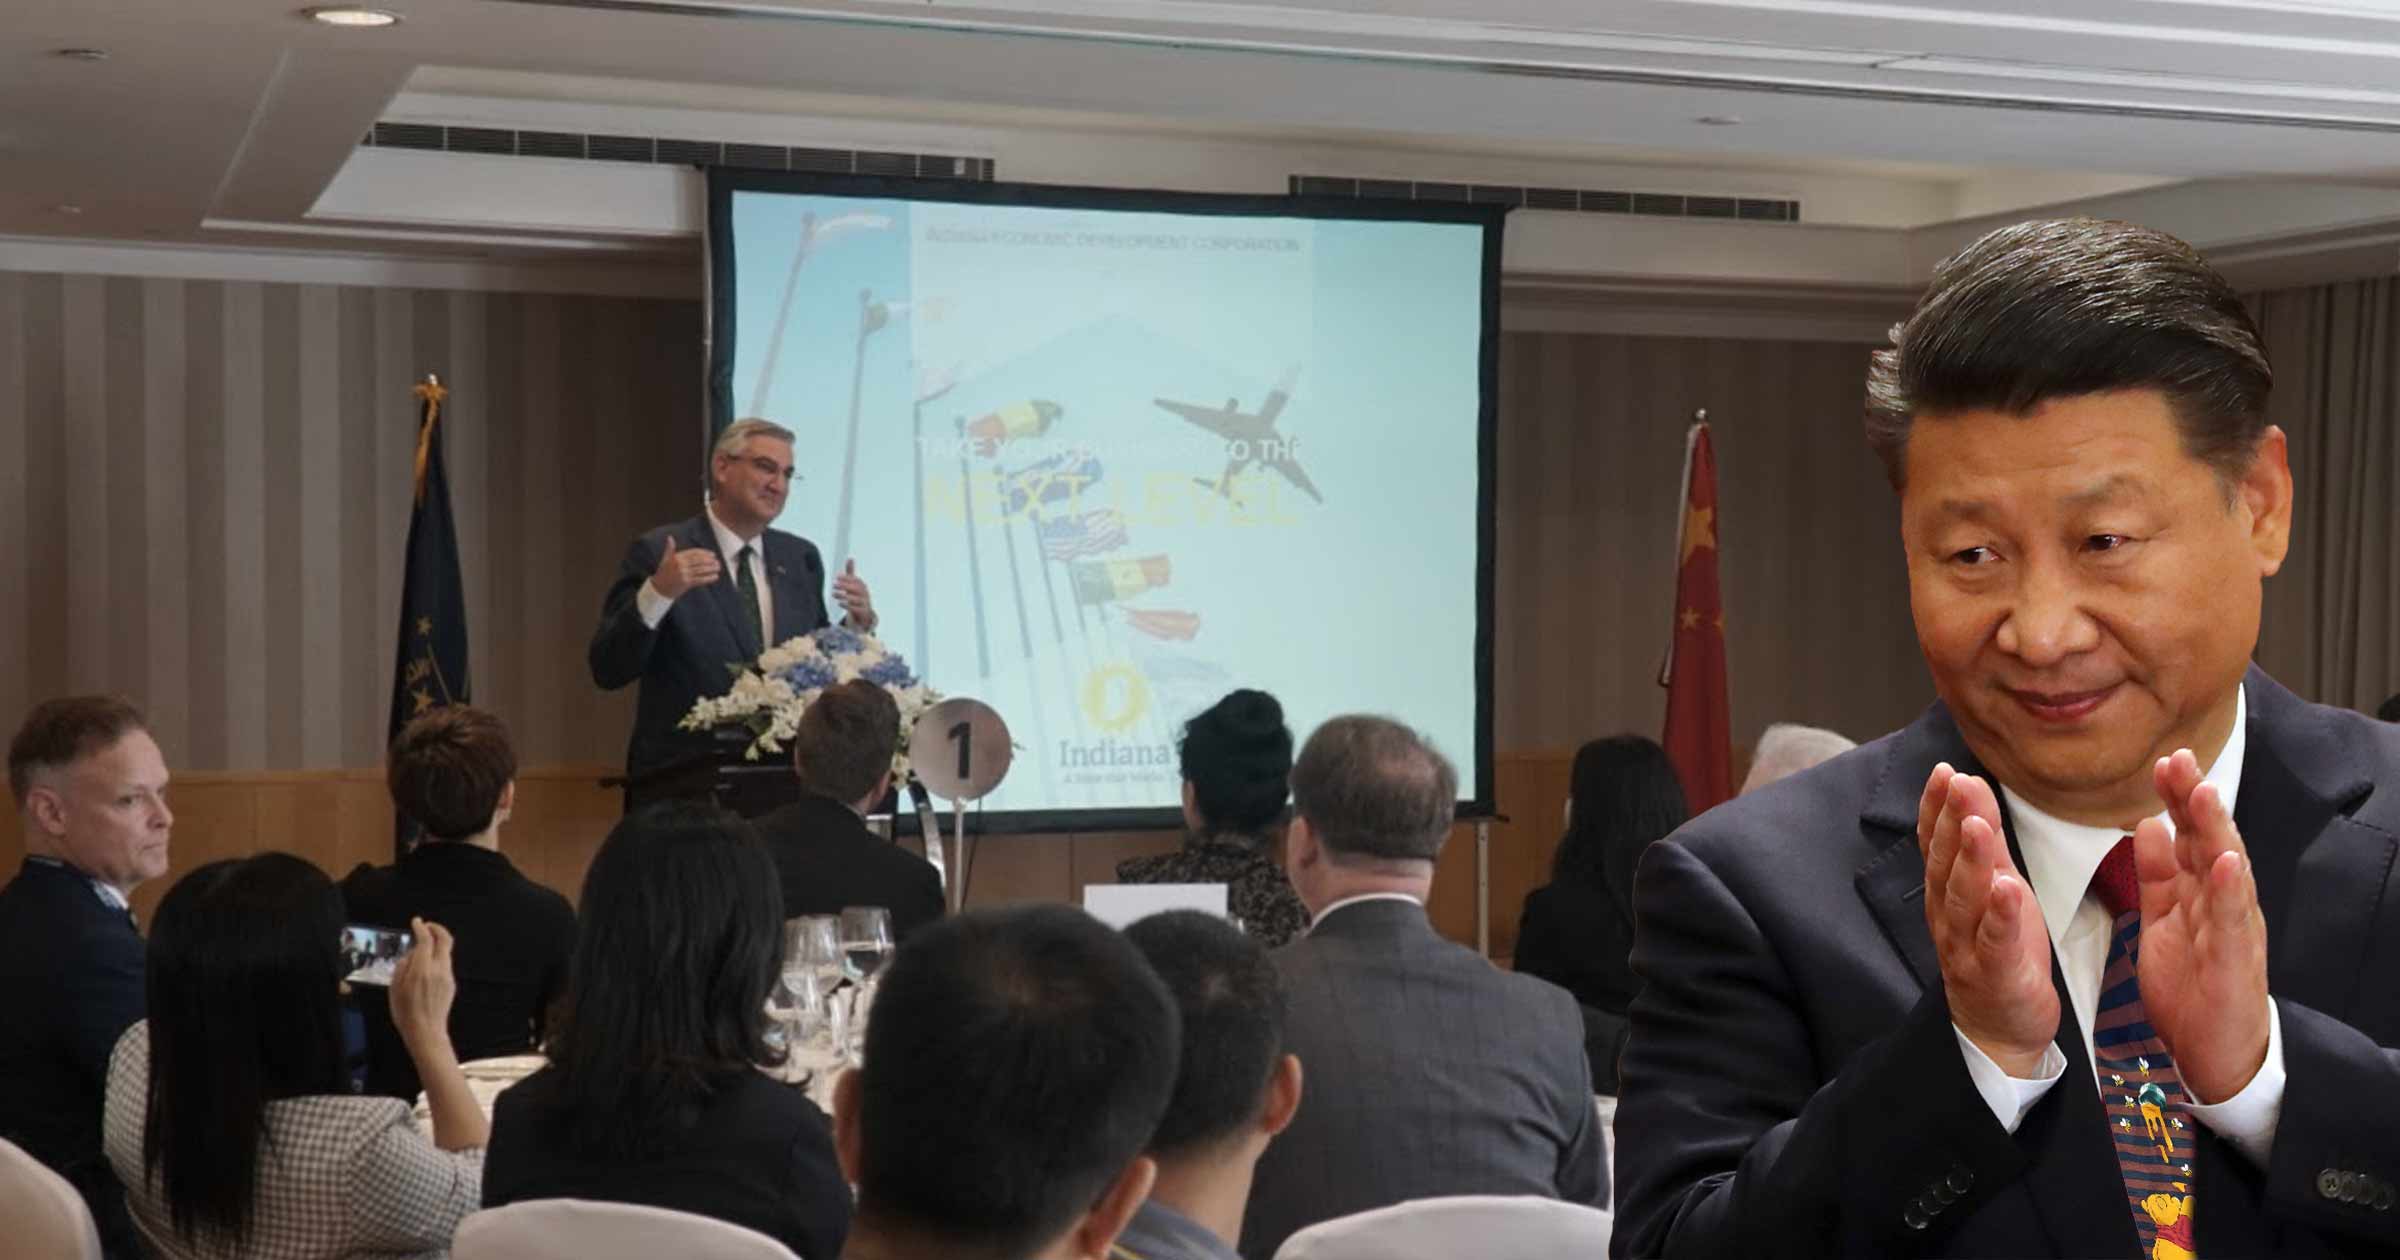 Indiana Governor Eric Holcomb Seen as Friendly to Chinese Communist Party's Goals